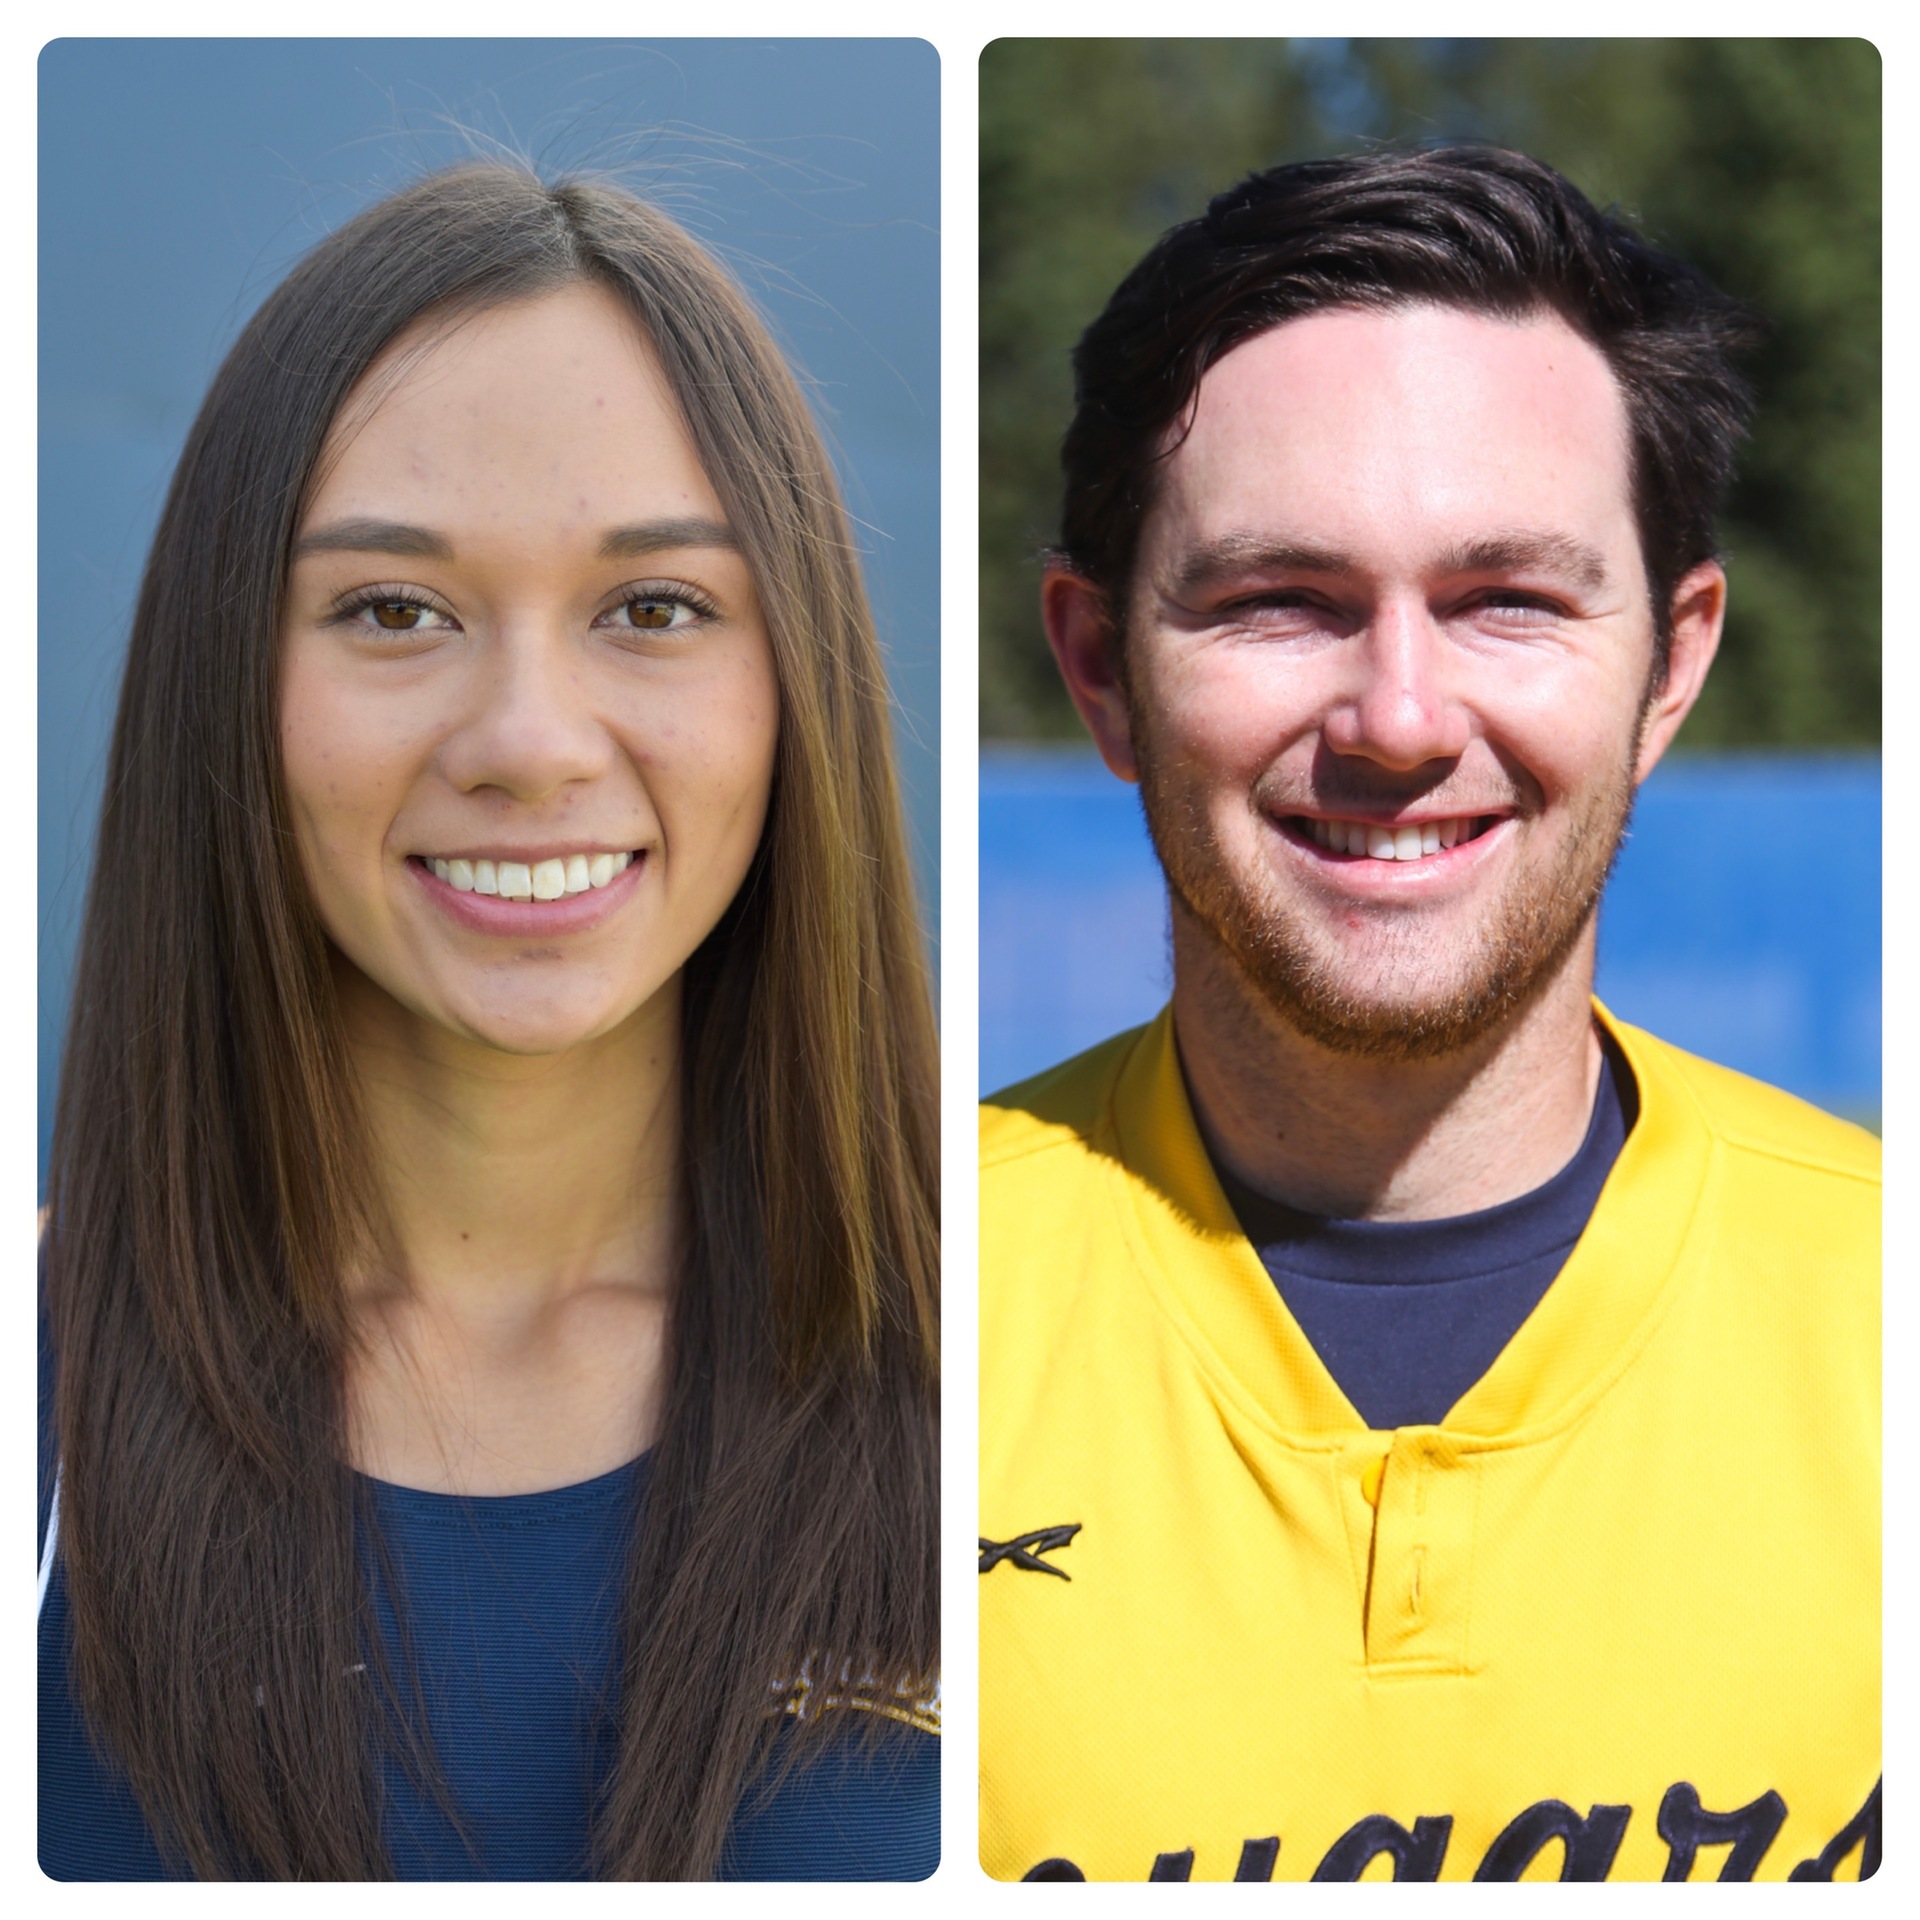 Headshot photos of former College of the Canyons student-athletes Lauren Hannah and Doyle Kane.